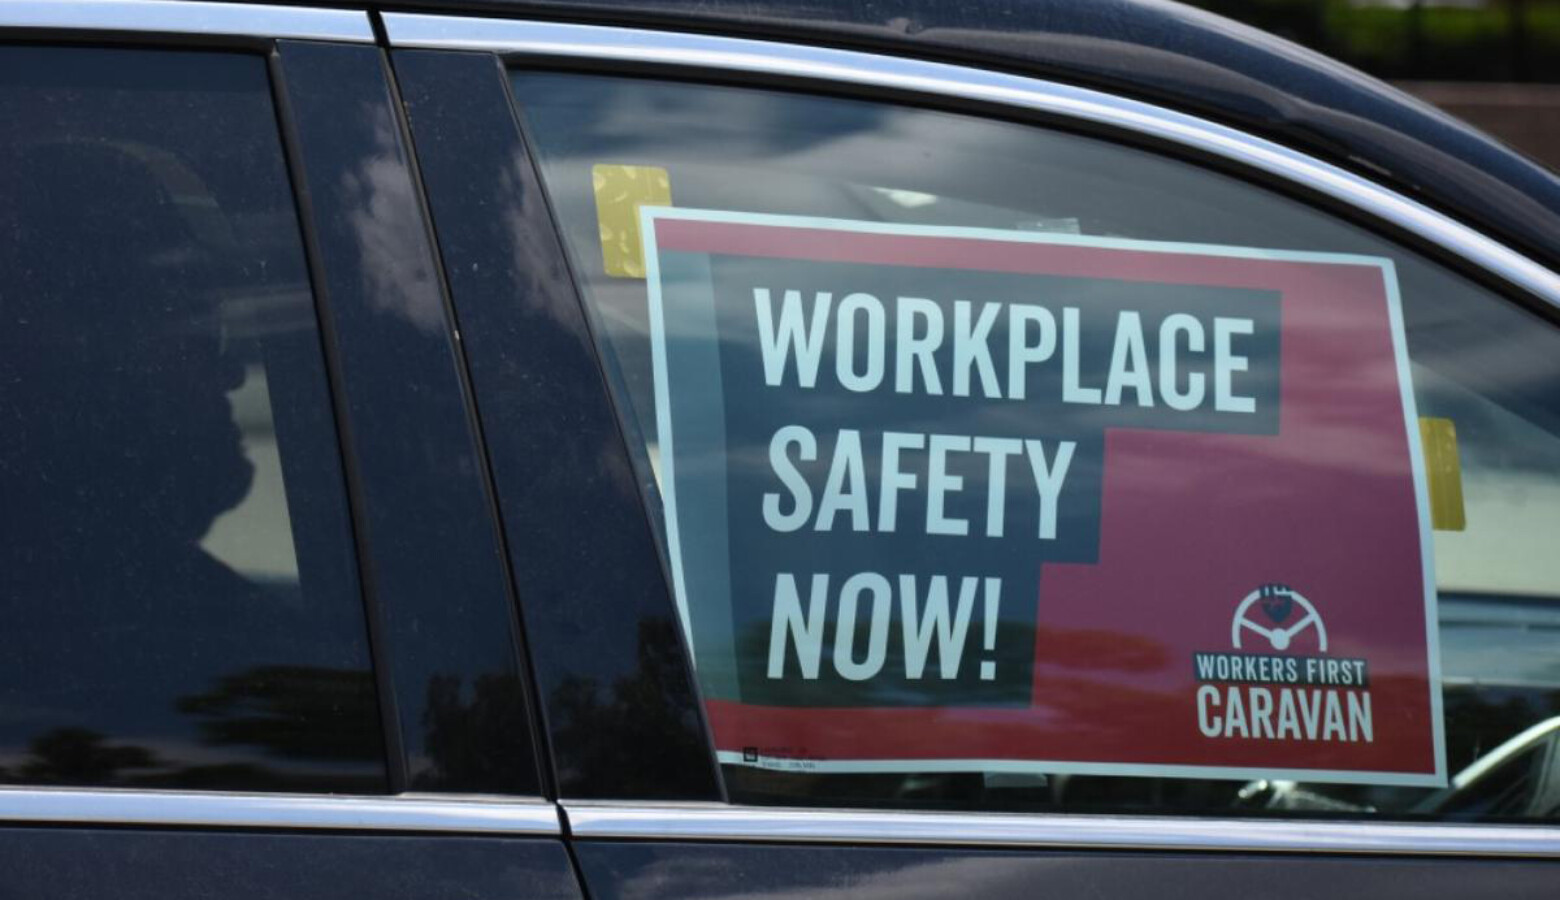 A sign in a car caravan at a labor rally in 2019 reads "Workplace Safety Now!" (Justin Hicks/IPB News)